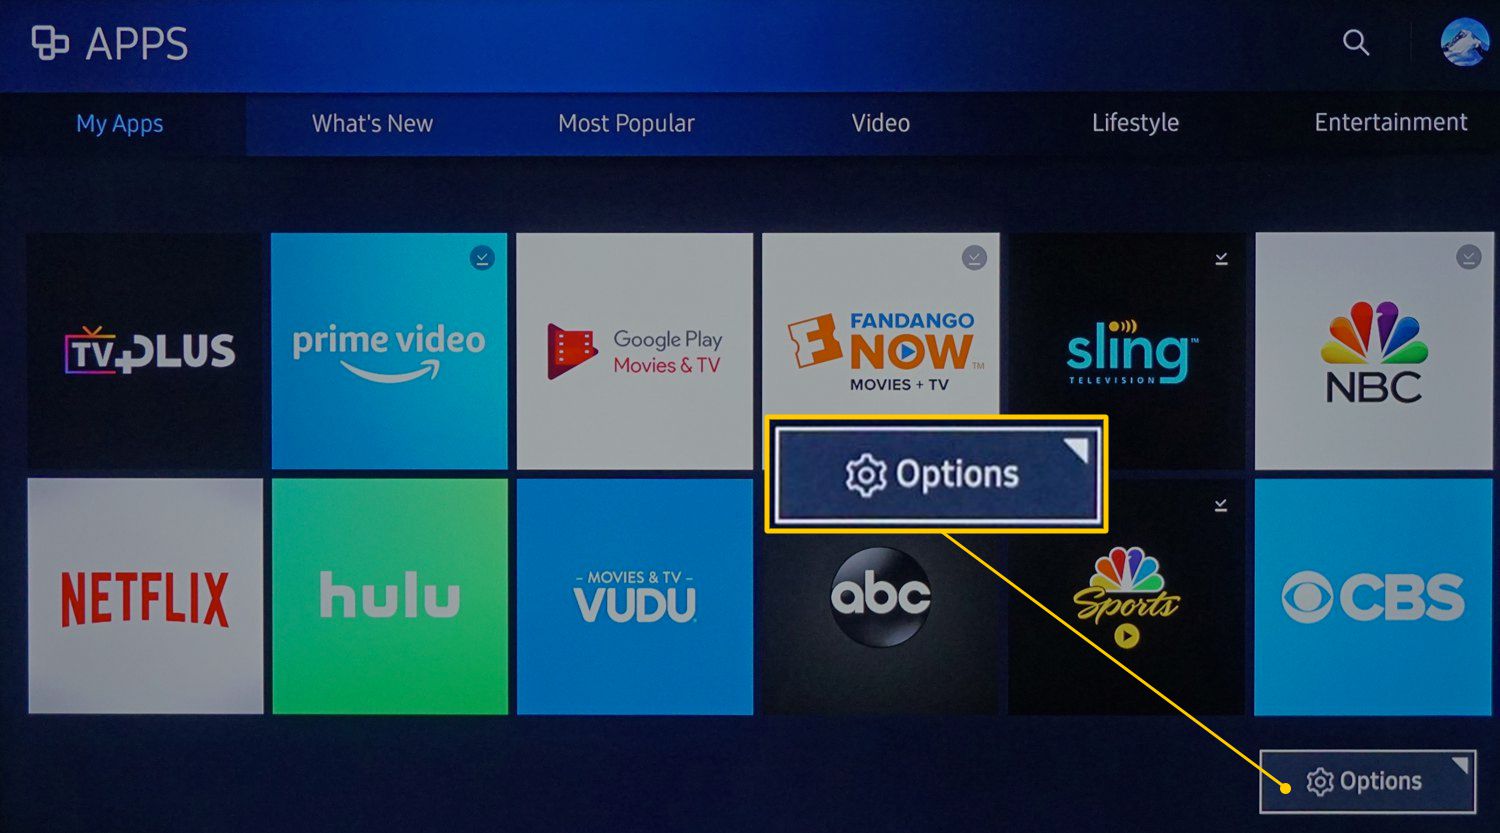 How to manage apps on Samsung smart TV?